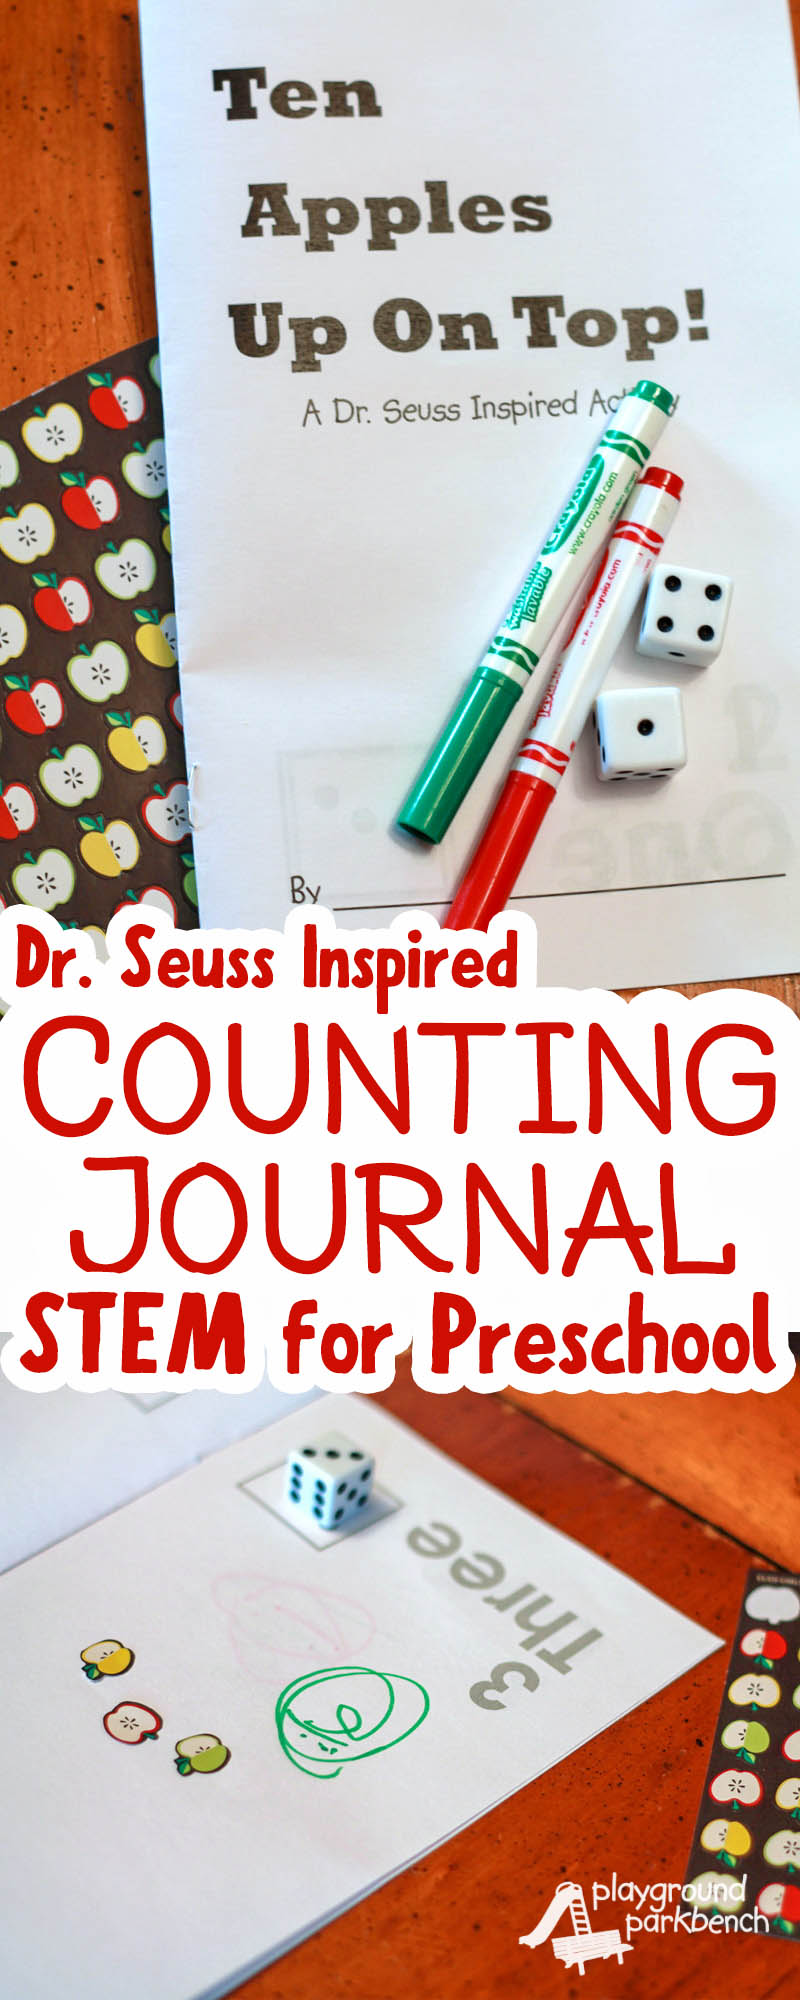 Document your child's numeracy skills with this Dr. Seuss Inspired Counting Journal. Work on numbers from 1 - 10, covering numeral formation, number words, one-to-one correspondence and die dot patterns. A simple STEM lesson plan for preschool